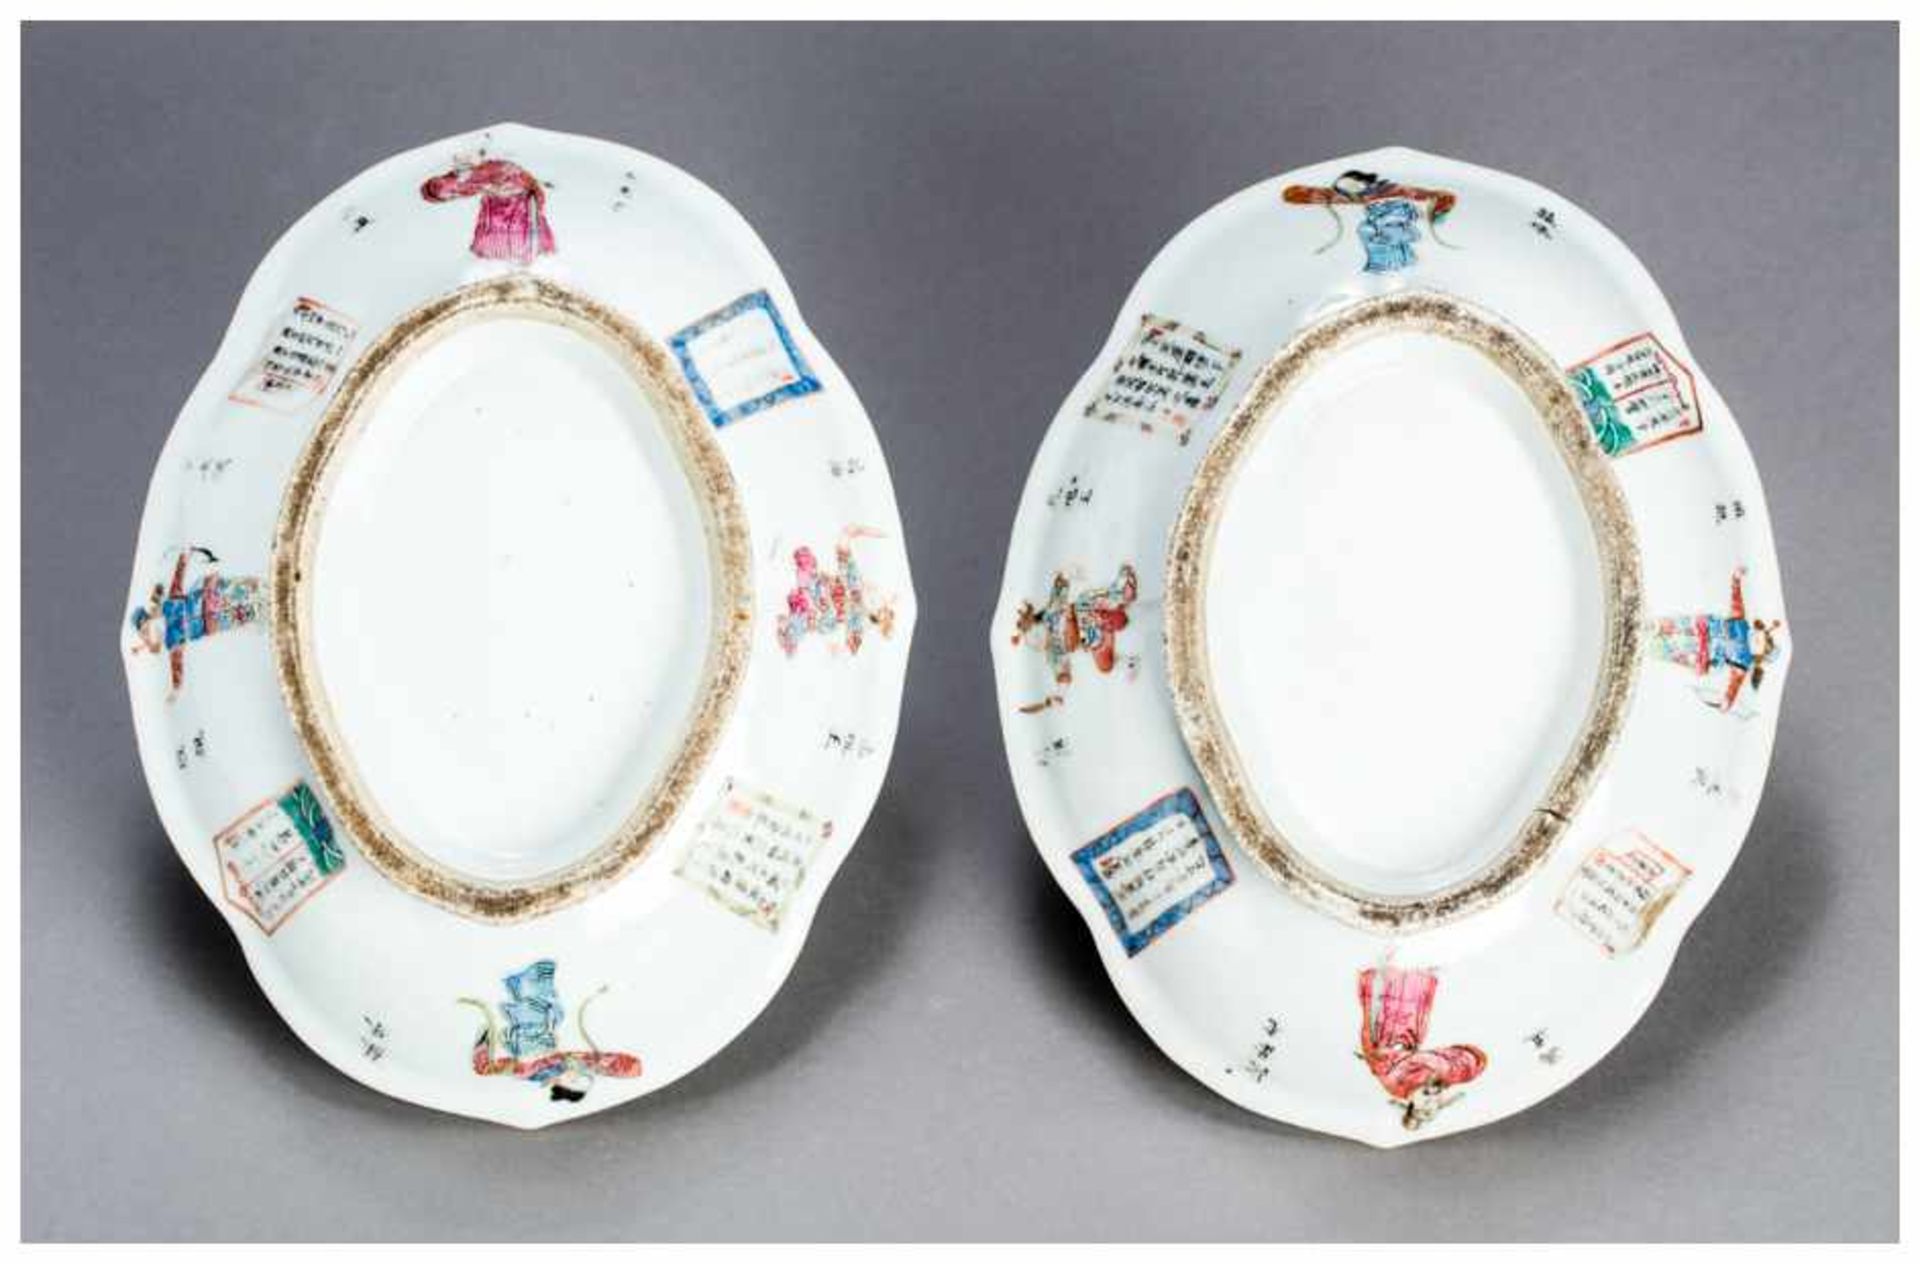 A PAIR OF PORCELAIN BOWLS Porcelain. China, late 19th centuryAn attractive pair of saucer shaped - Image 3 of 3